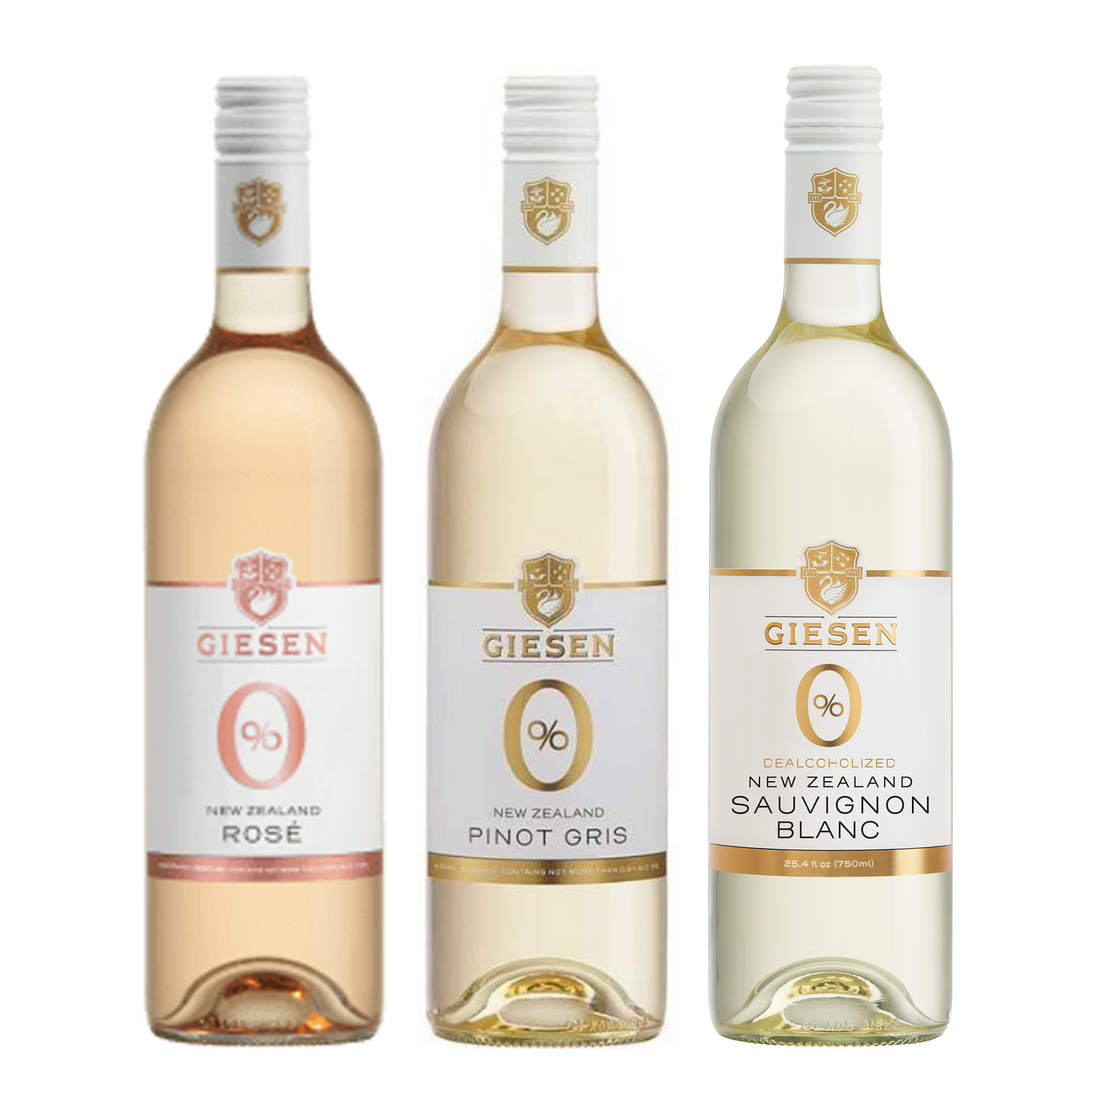 Giesen Taster Pack - 3pk - Non-alcoholic Sauvignon Blanc, Pinot Gris, and Rosé - Boisson — Brooklyn's Non-Alcoholic Spirits, Beer, Wine, and Home Bar Shop in Cobble Hill